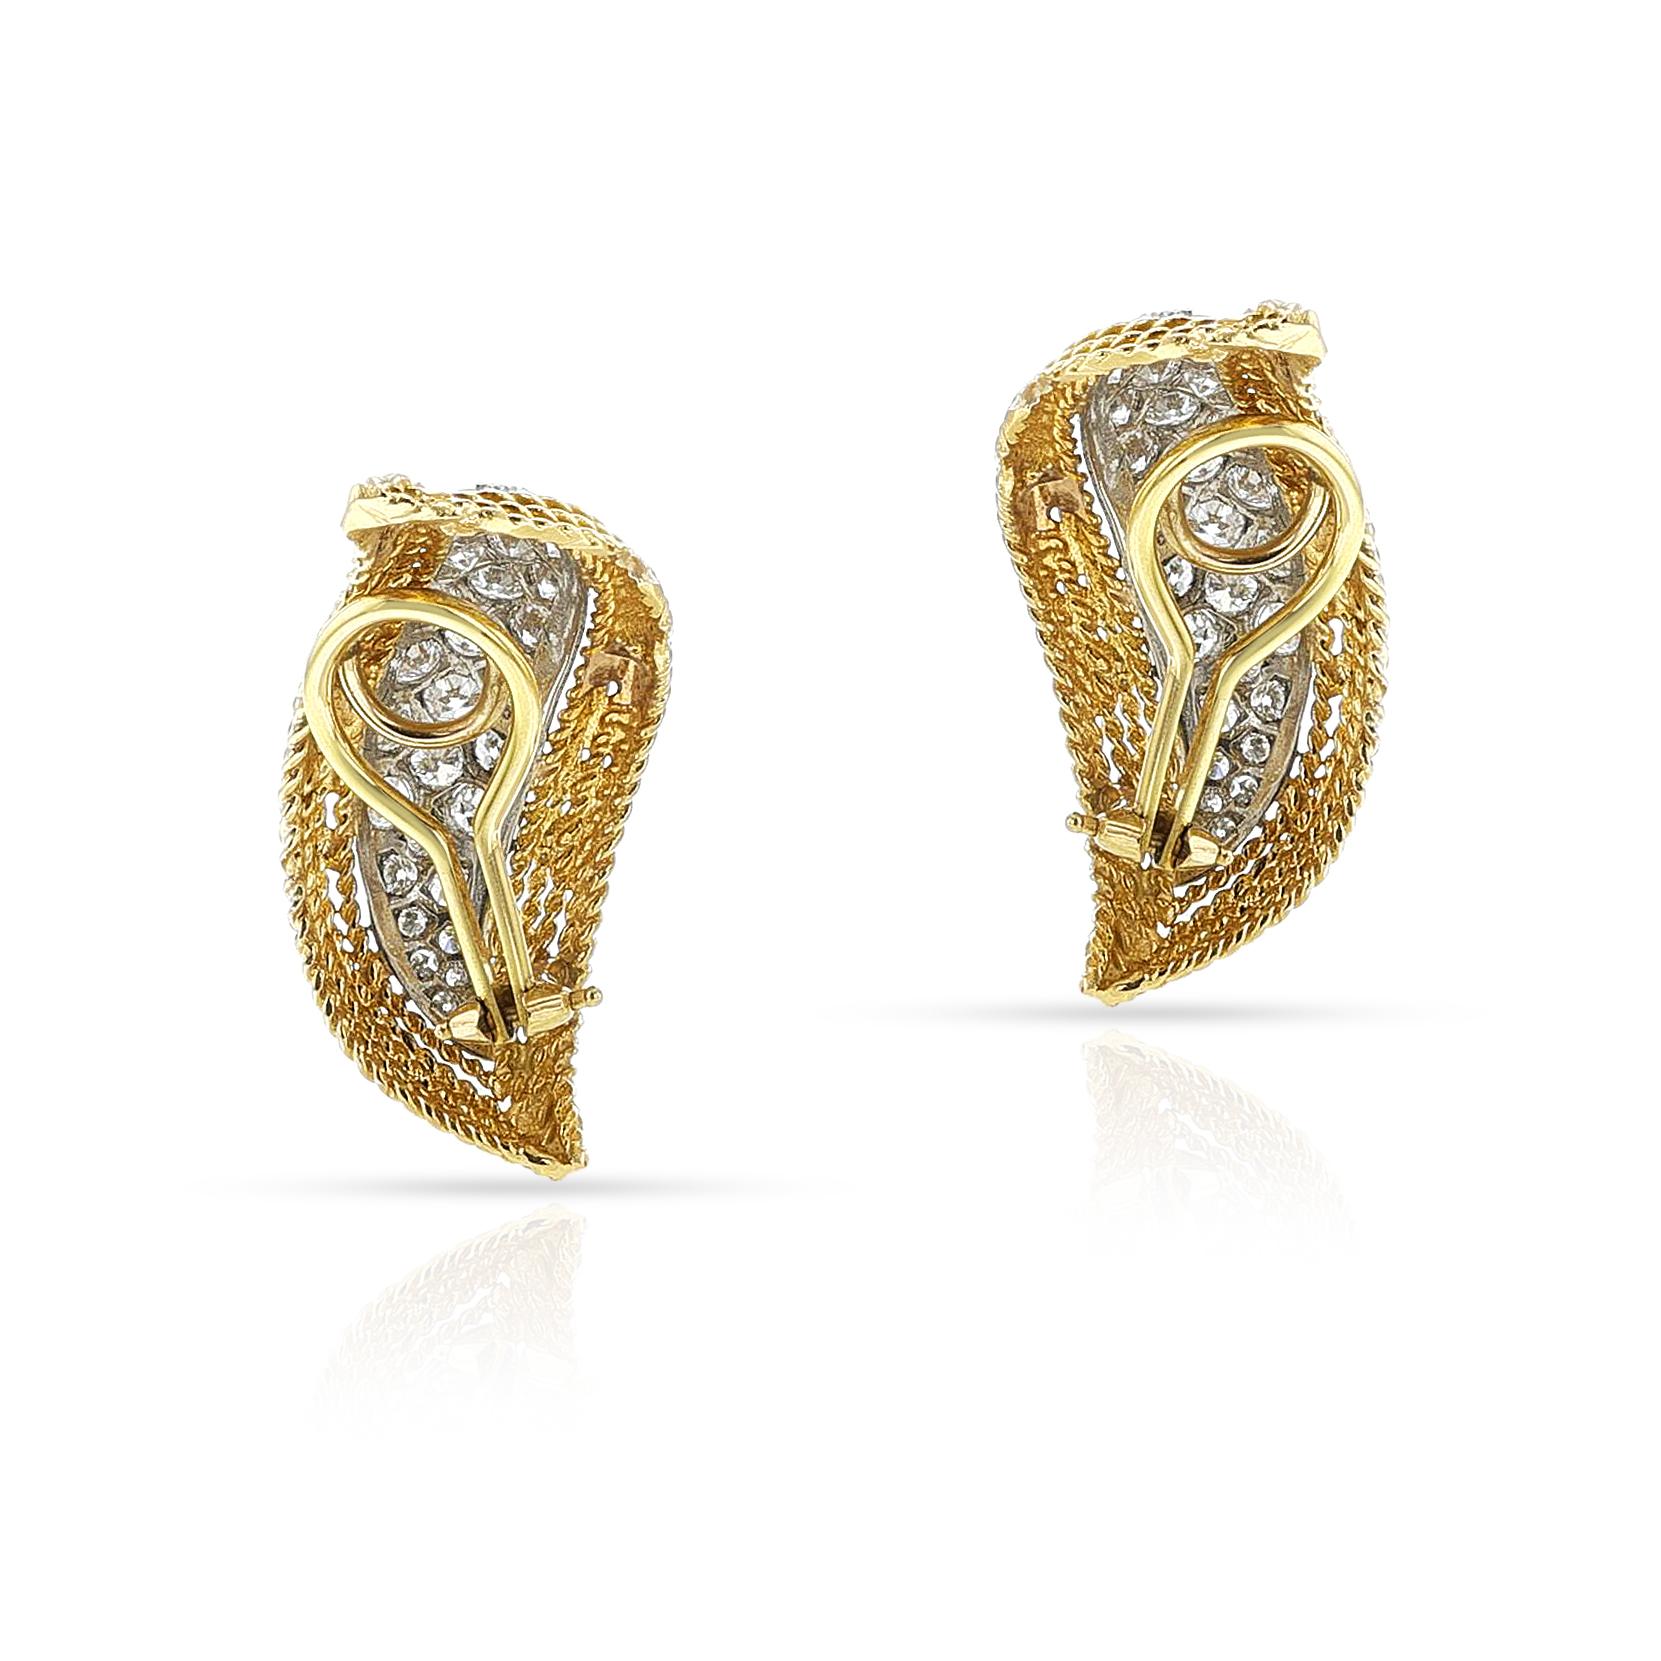 Diamond and Gold Earrings, 18k In Excellent Condition For Sale In New York, NY